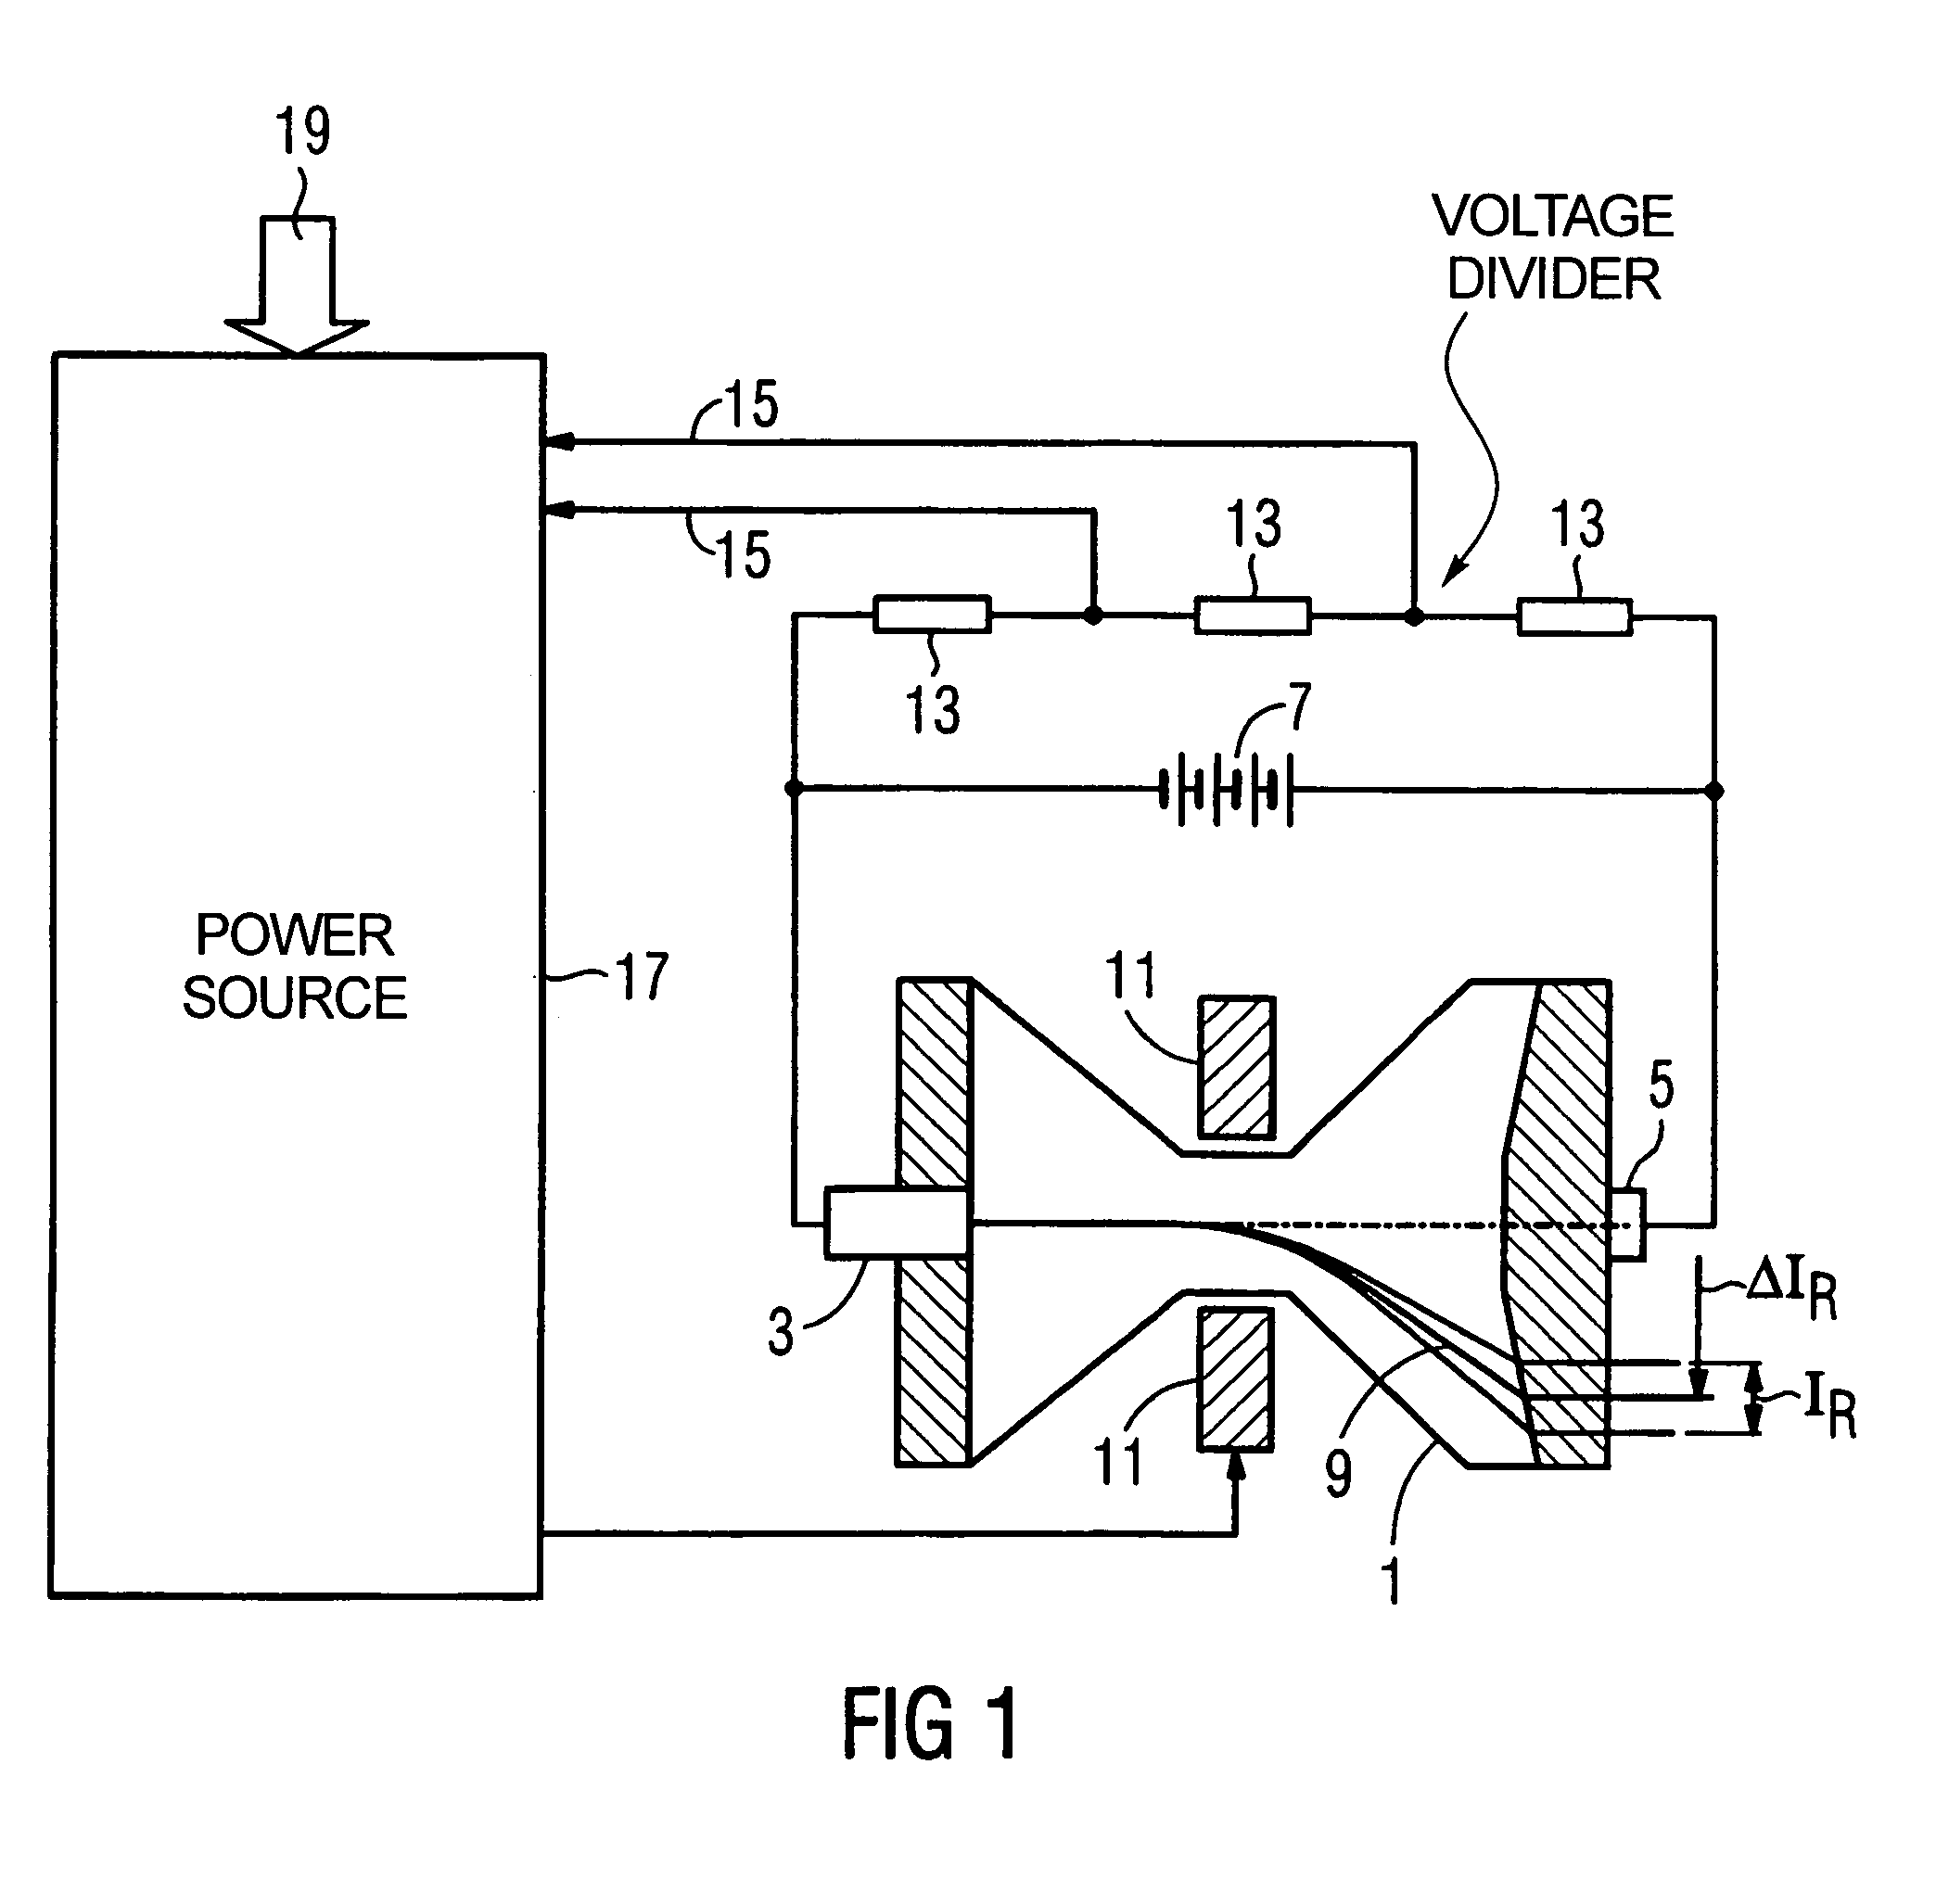 Power source for regulated operation of the deflection coil of an x-ray tube